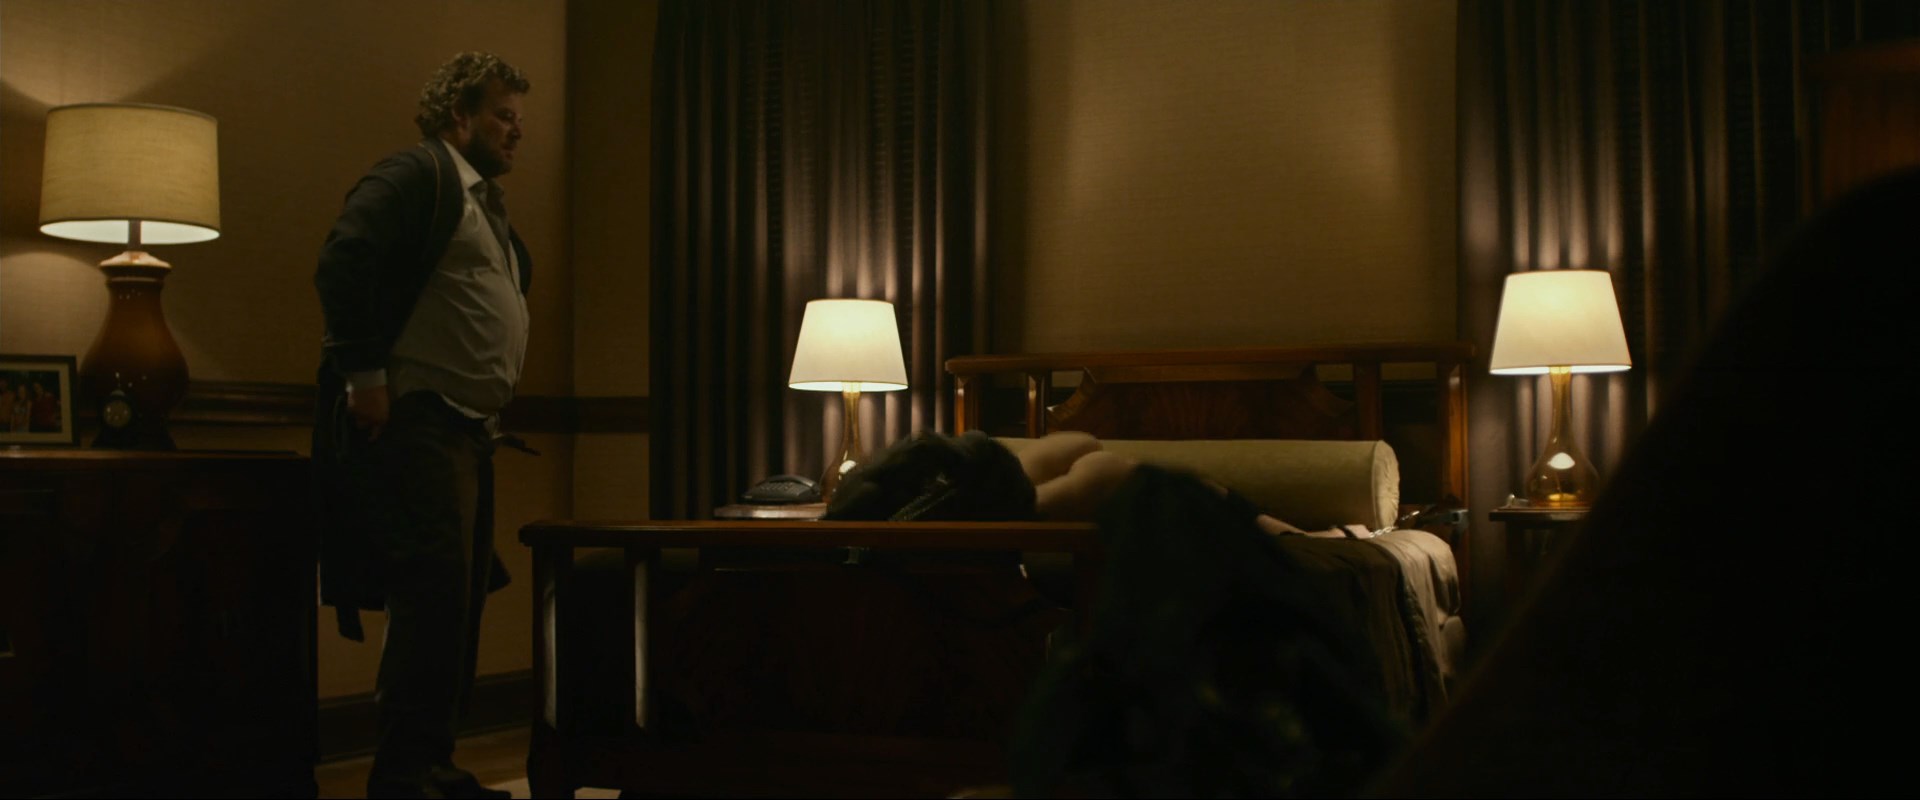 Rooney Mara, The Girl with the Dragon Tattoo (2011) .